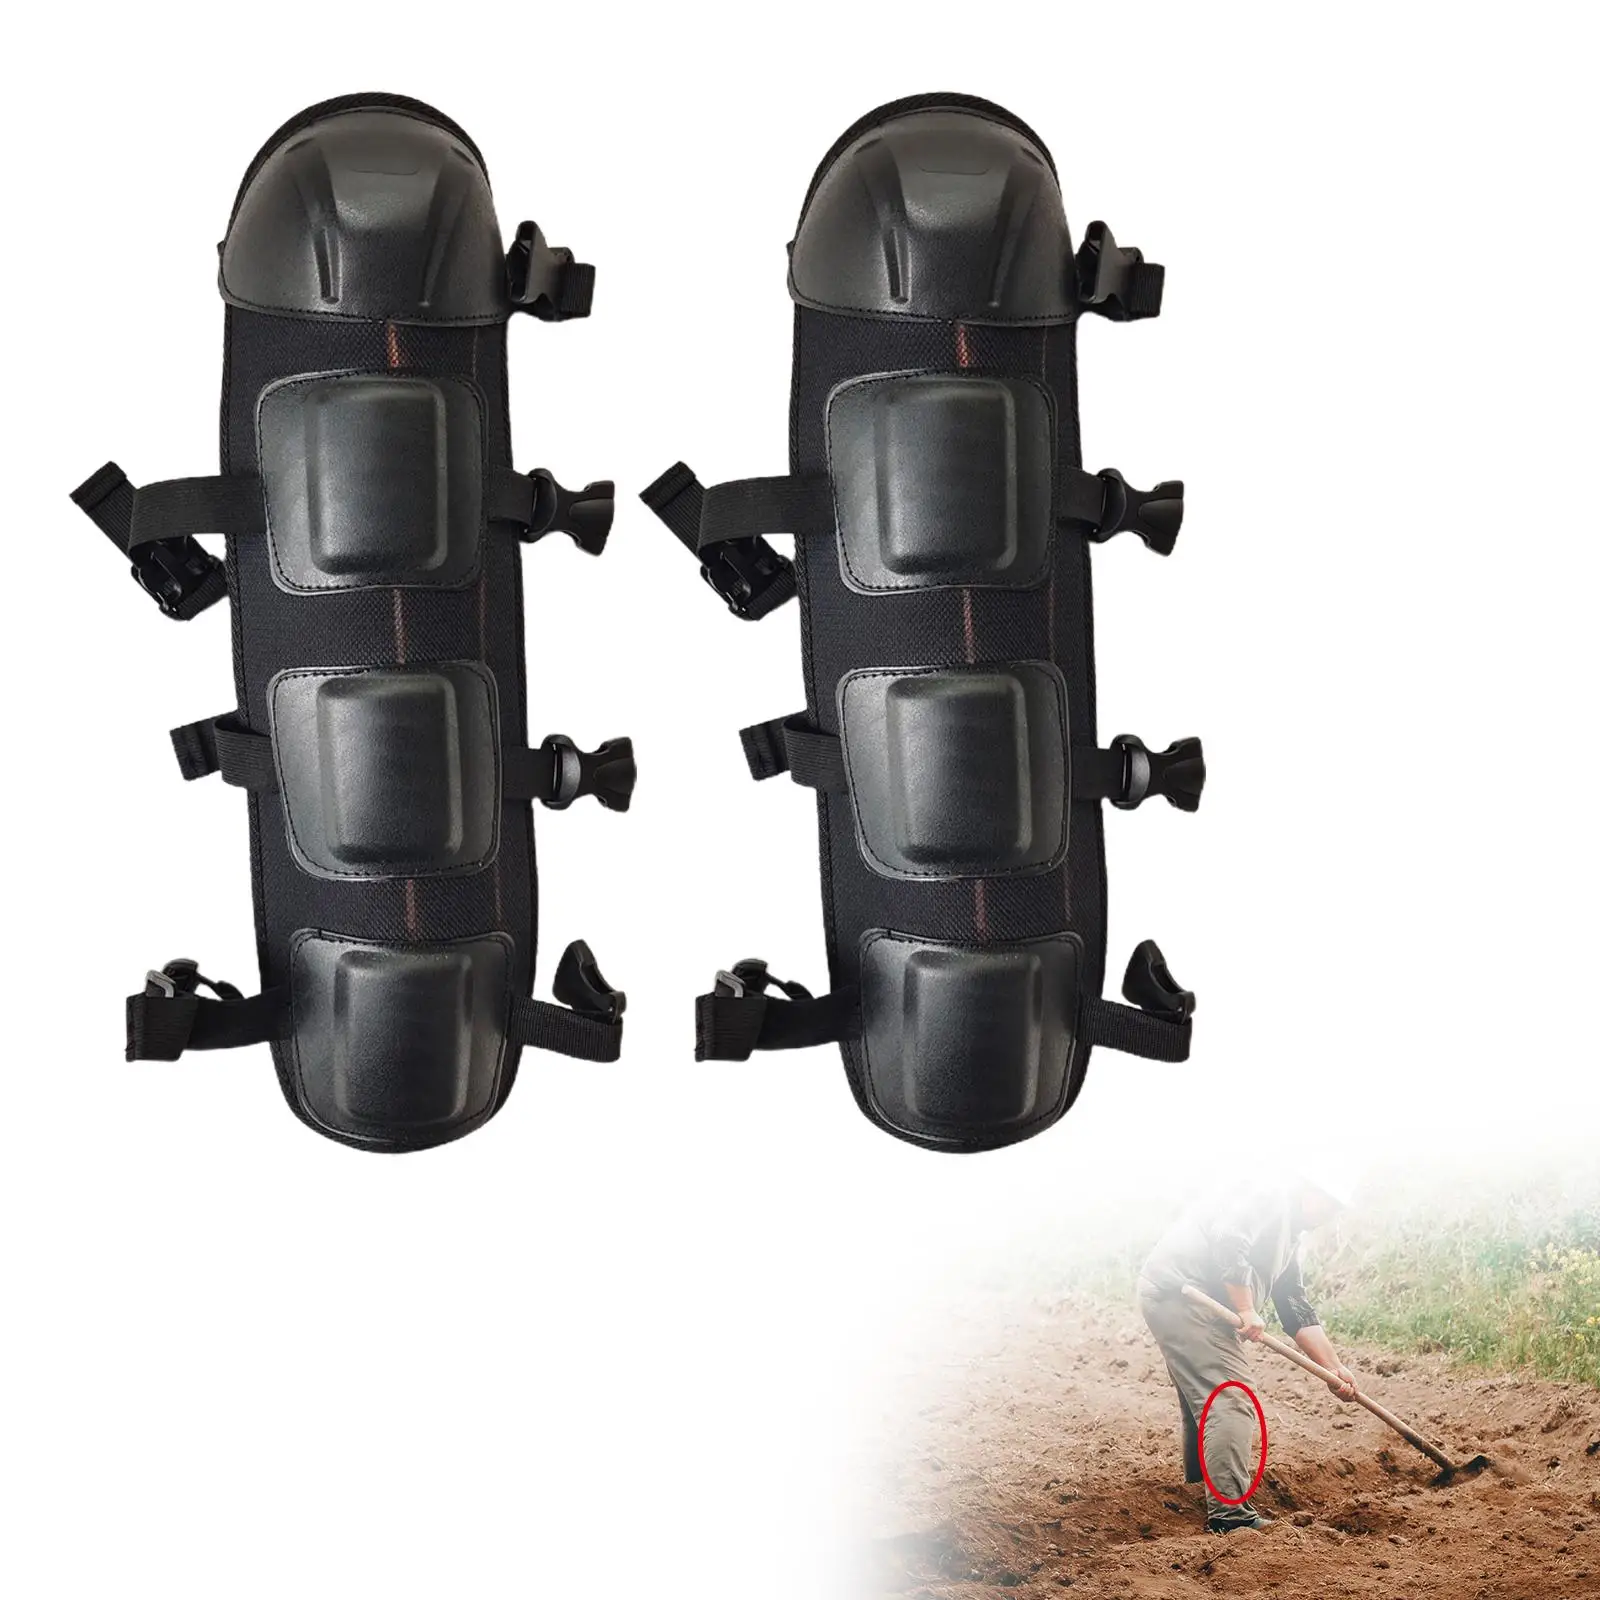 Knee Pads Kneelet Protective Gear Protection Knees Adjustable Straps Motorcycle Knee Shin Guards for Construction Mountain Bikes